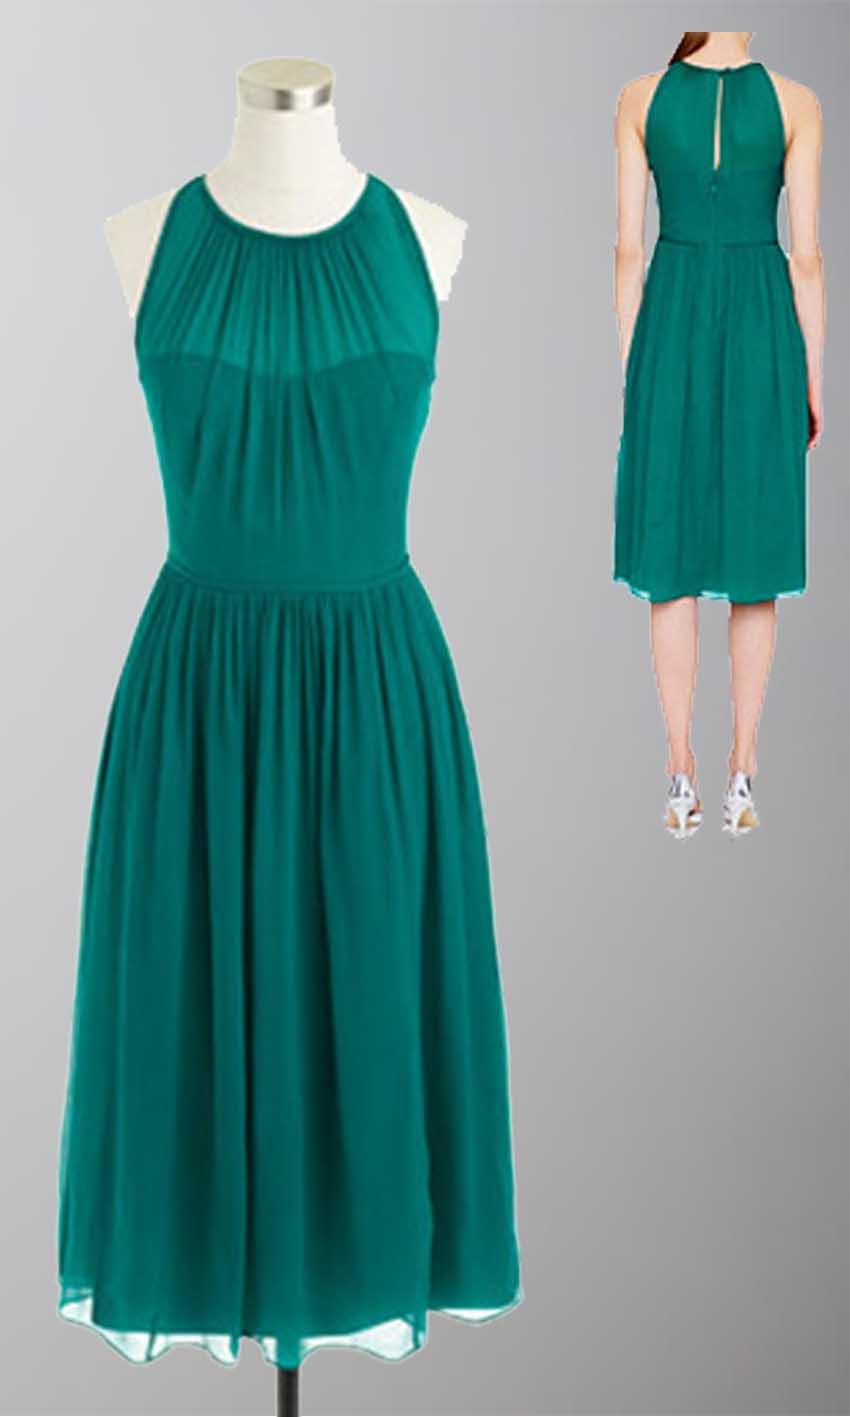 Свадьба - Peacock Sleek Illusion Neckline Bridesmaid Dresses KSP178 [KSP178] - £87.00 : Cheap Prom Dresses Uk, Bridesmaid Dresses, 2014 Prom & Evening Dresses, Look for cheap elegant prom dresses 2014, cocktail gowns, or dresses for special occasions? kissprom.co.u